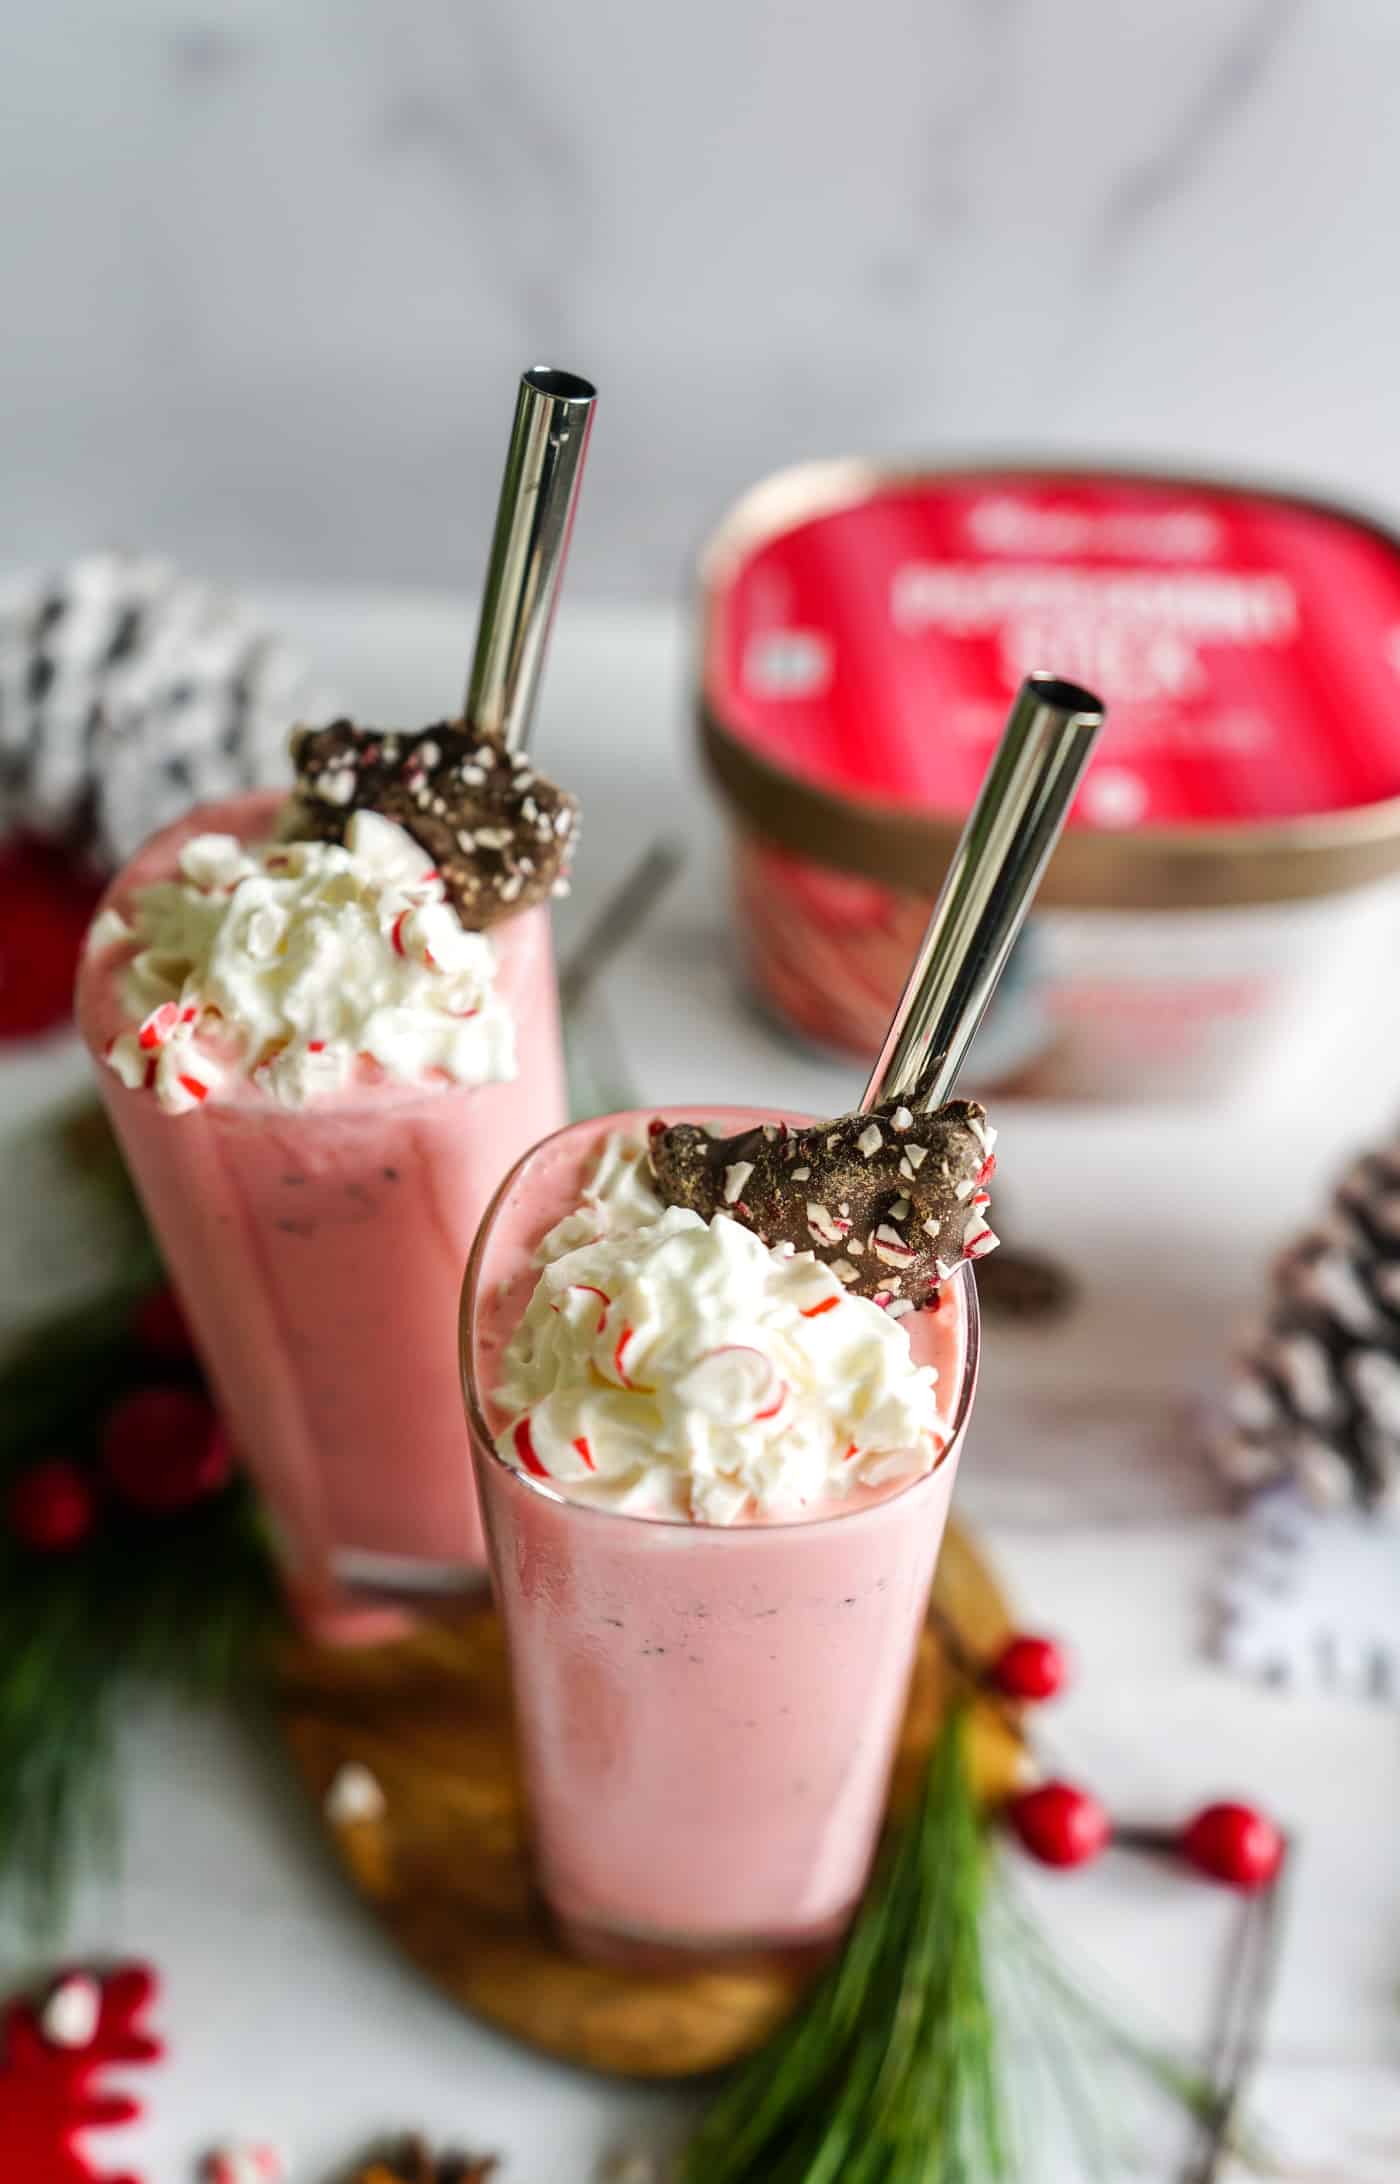 Peppermint Milkshake made with Hudsonville Ice Cream topped with whipped cream